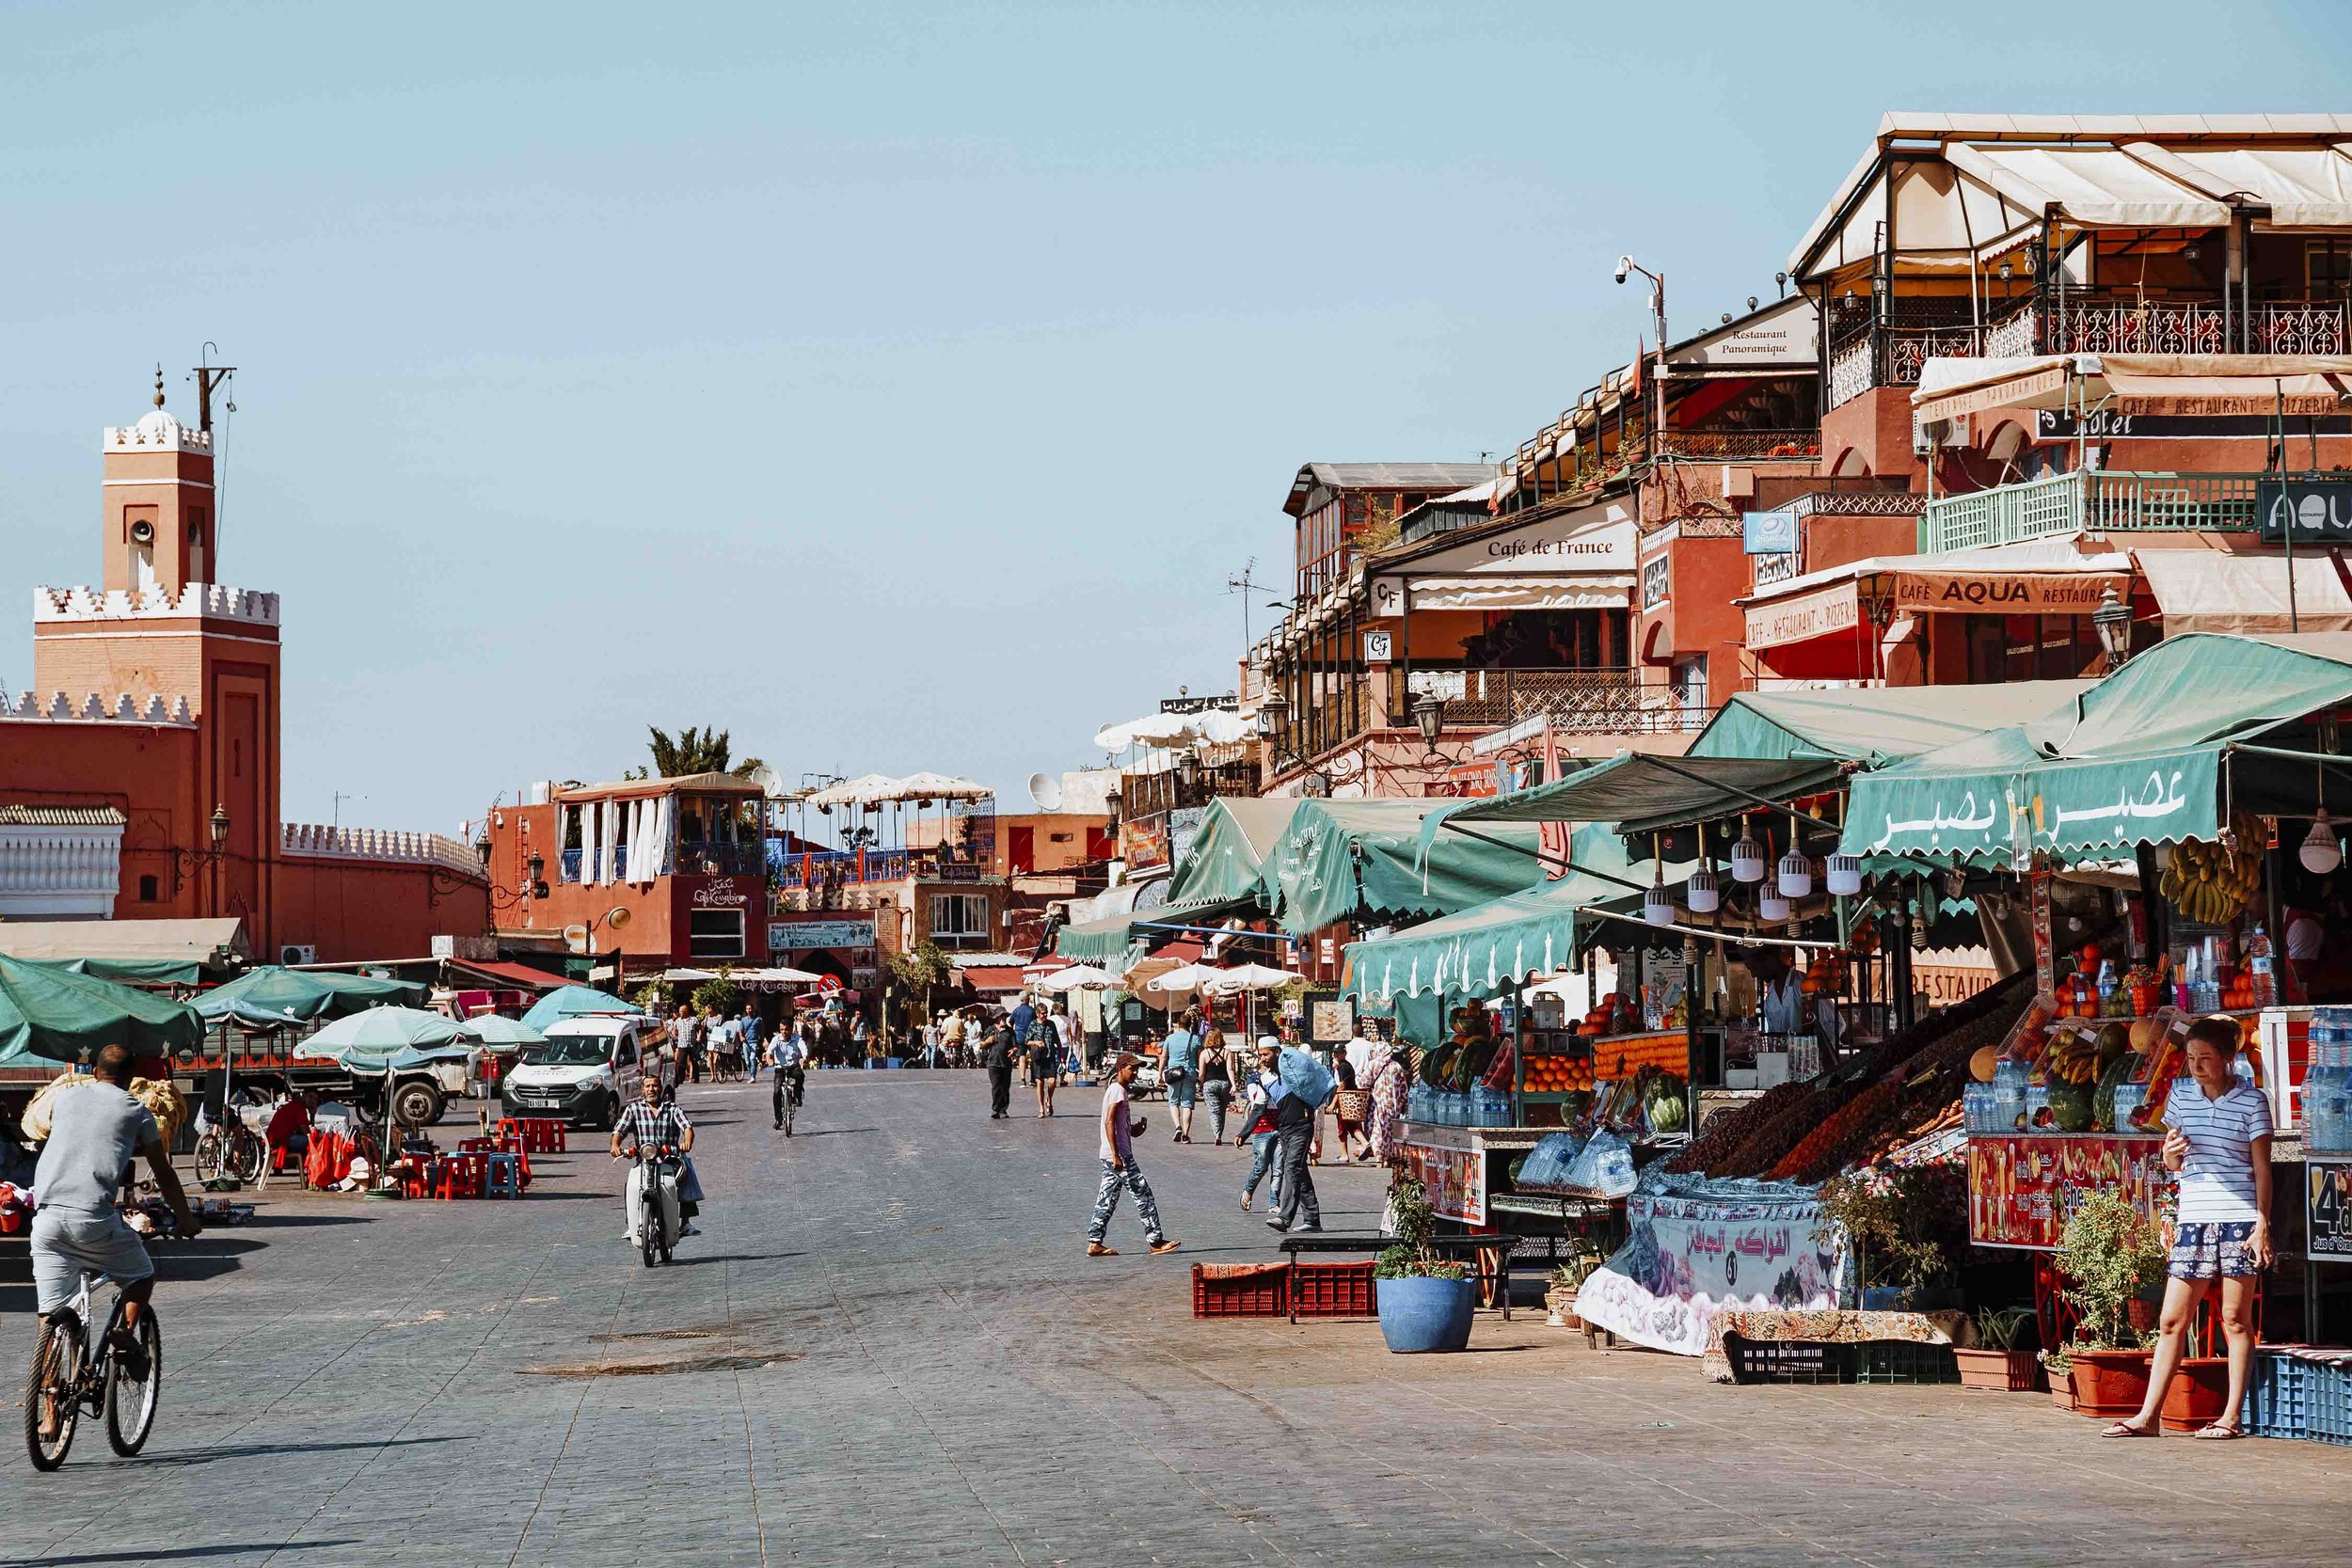 Marrakech market square with stalls is Marrakech safe? is it safe to visit marrakech